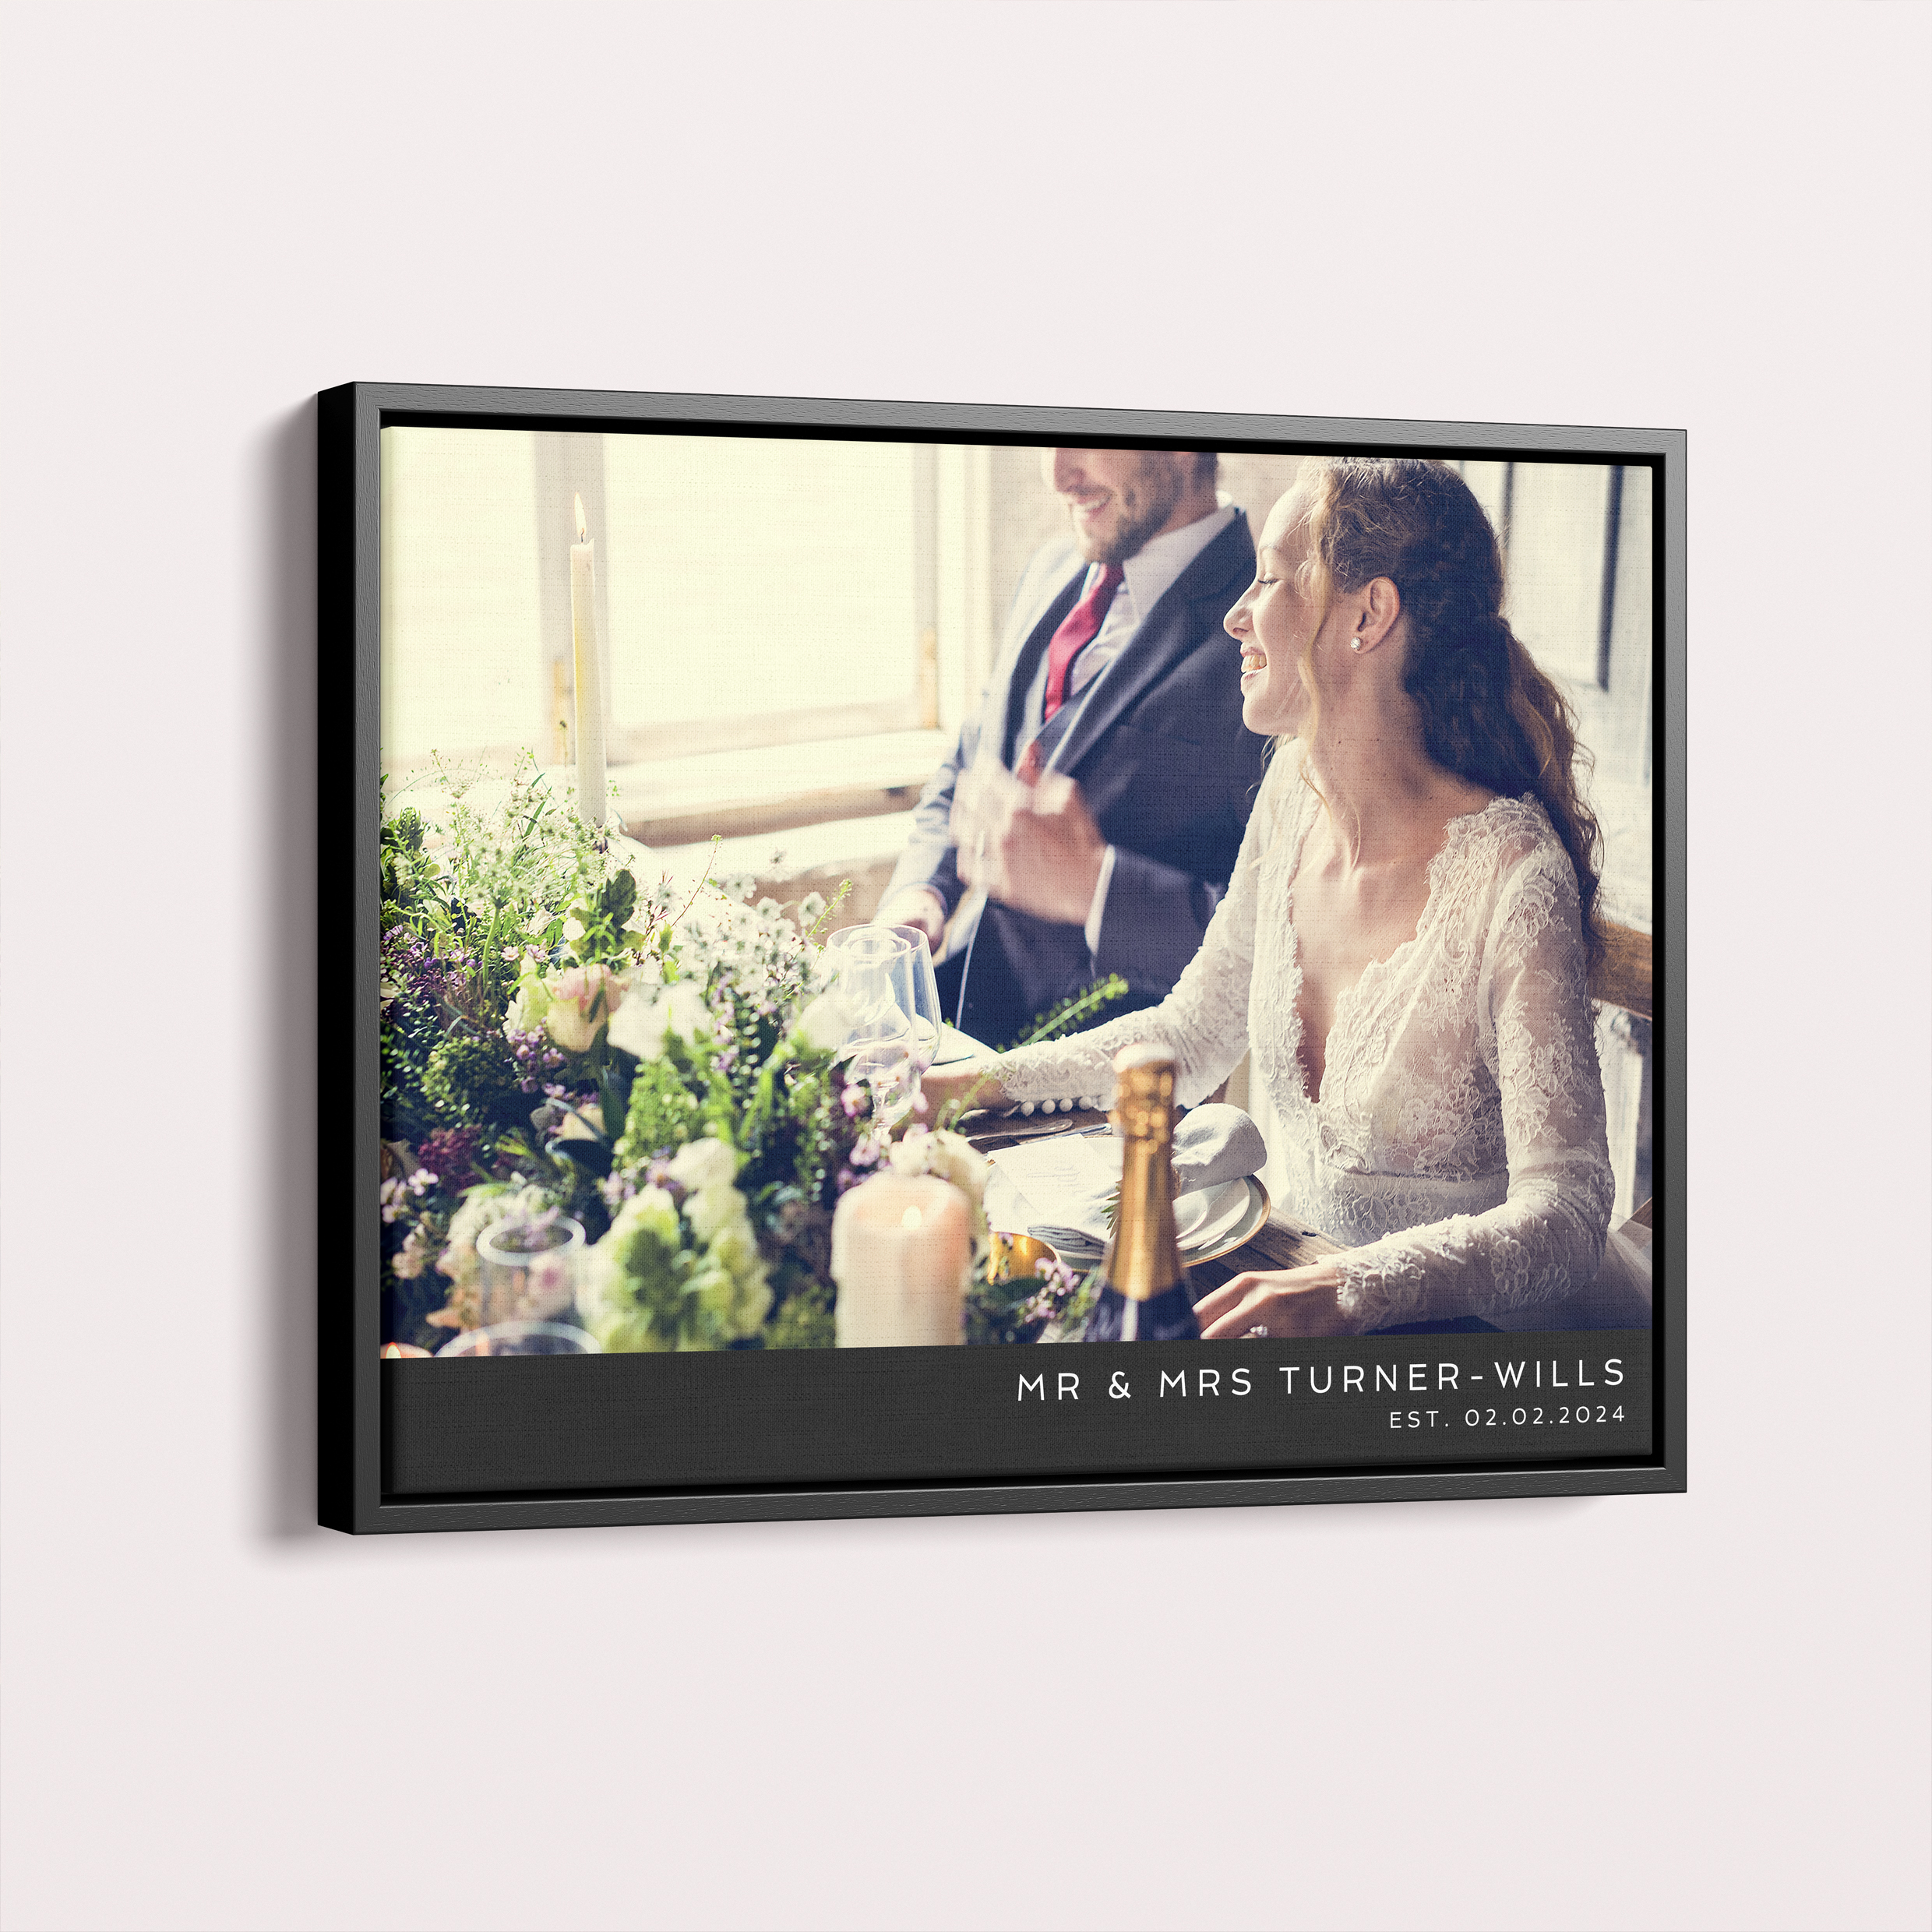  Personalized Wedding Bliss Framed Photo Canvas - Introducing a loving tribute capturing your wedding day essence, this landscape-oriented canvas holds a special place for one photo, serving as a beautiful keepsake.